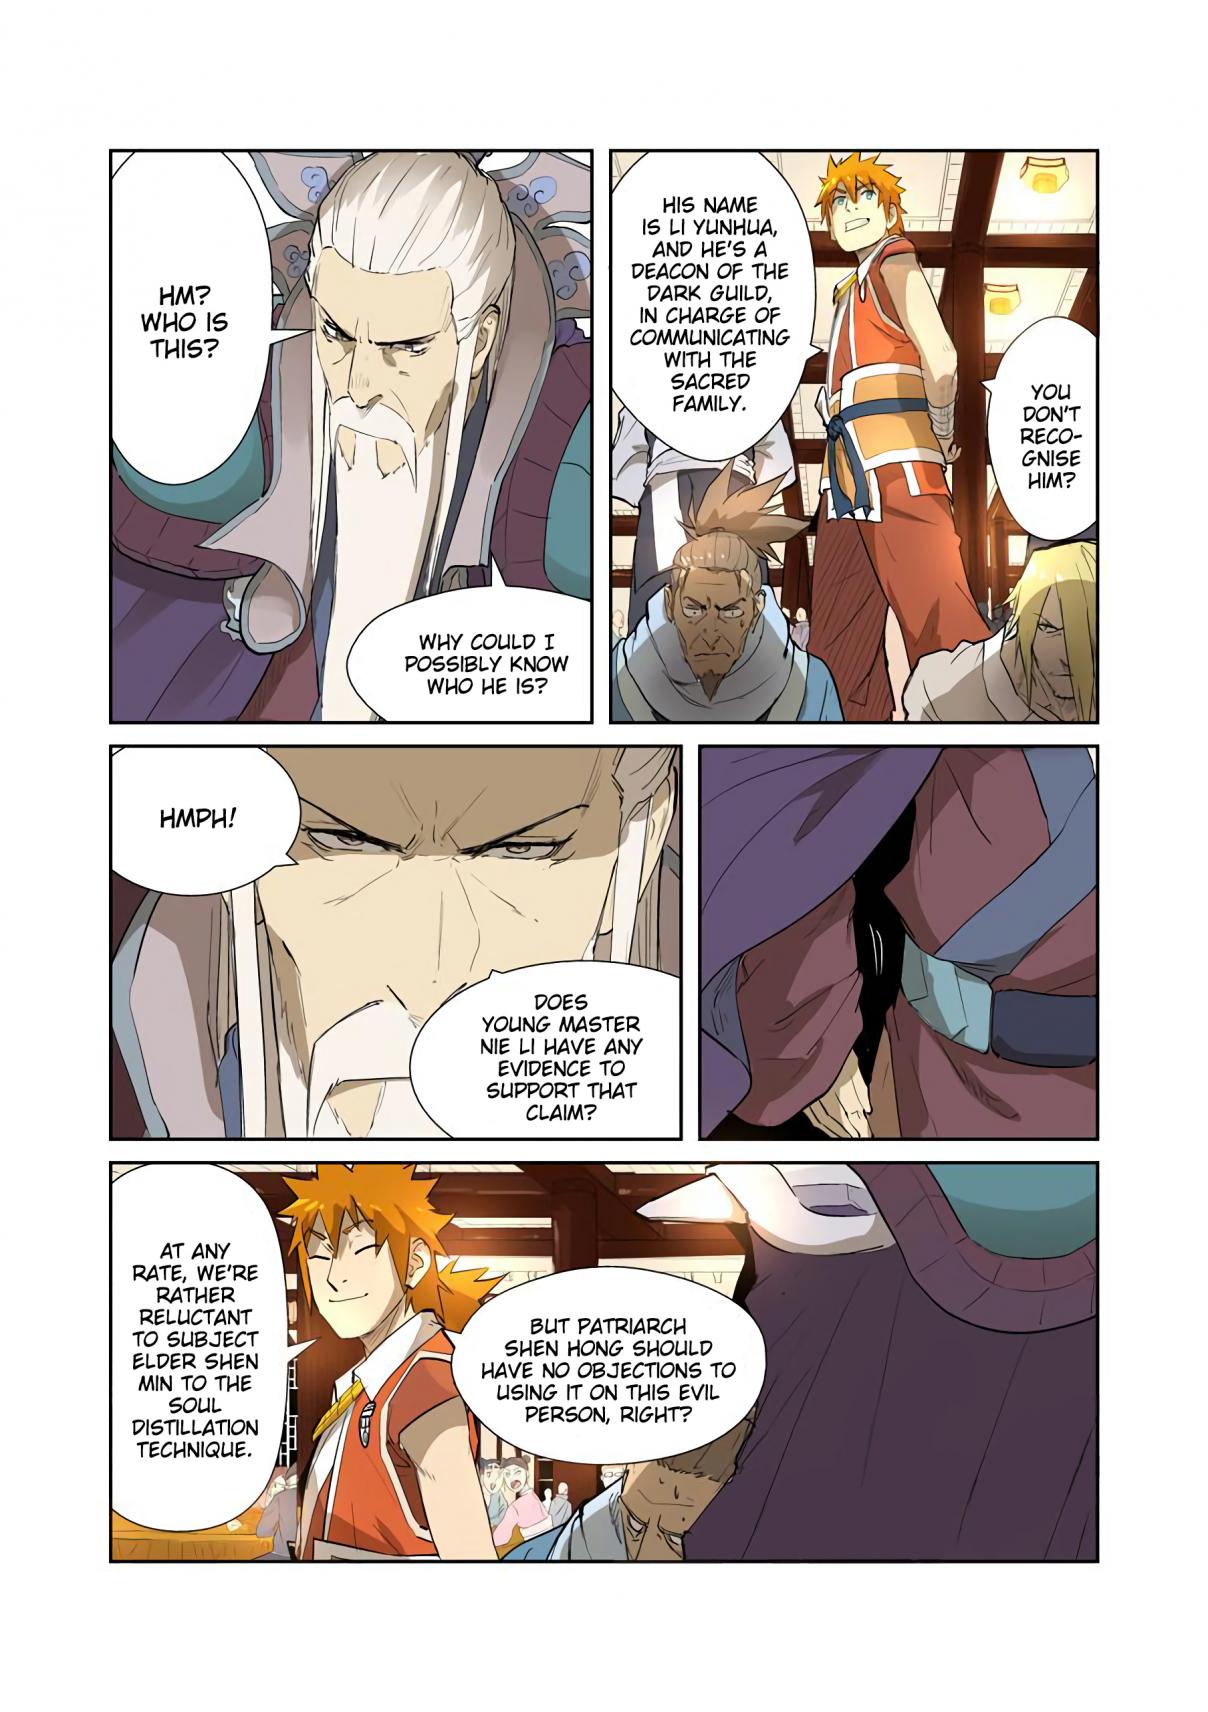 Tales of Demons and Gods Ch. 204.5 War of Words (Part 2)